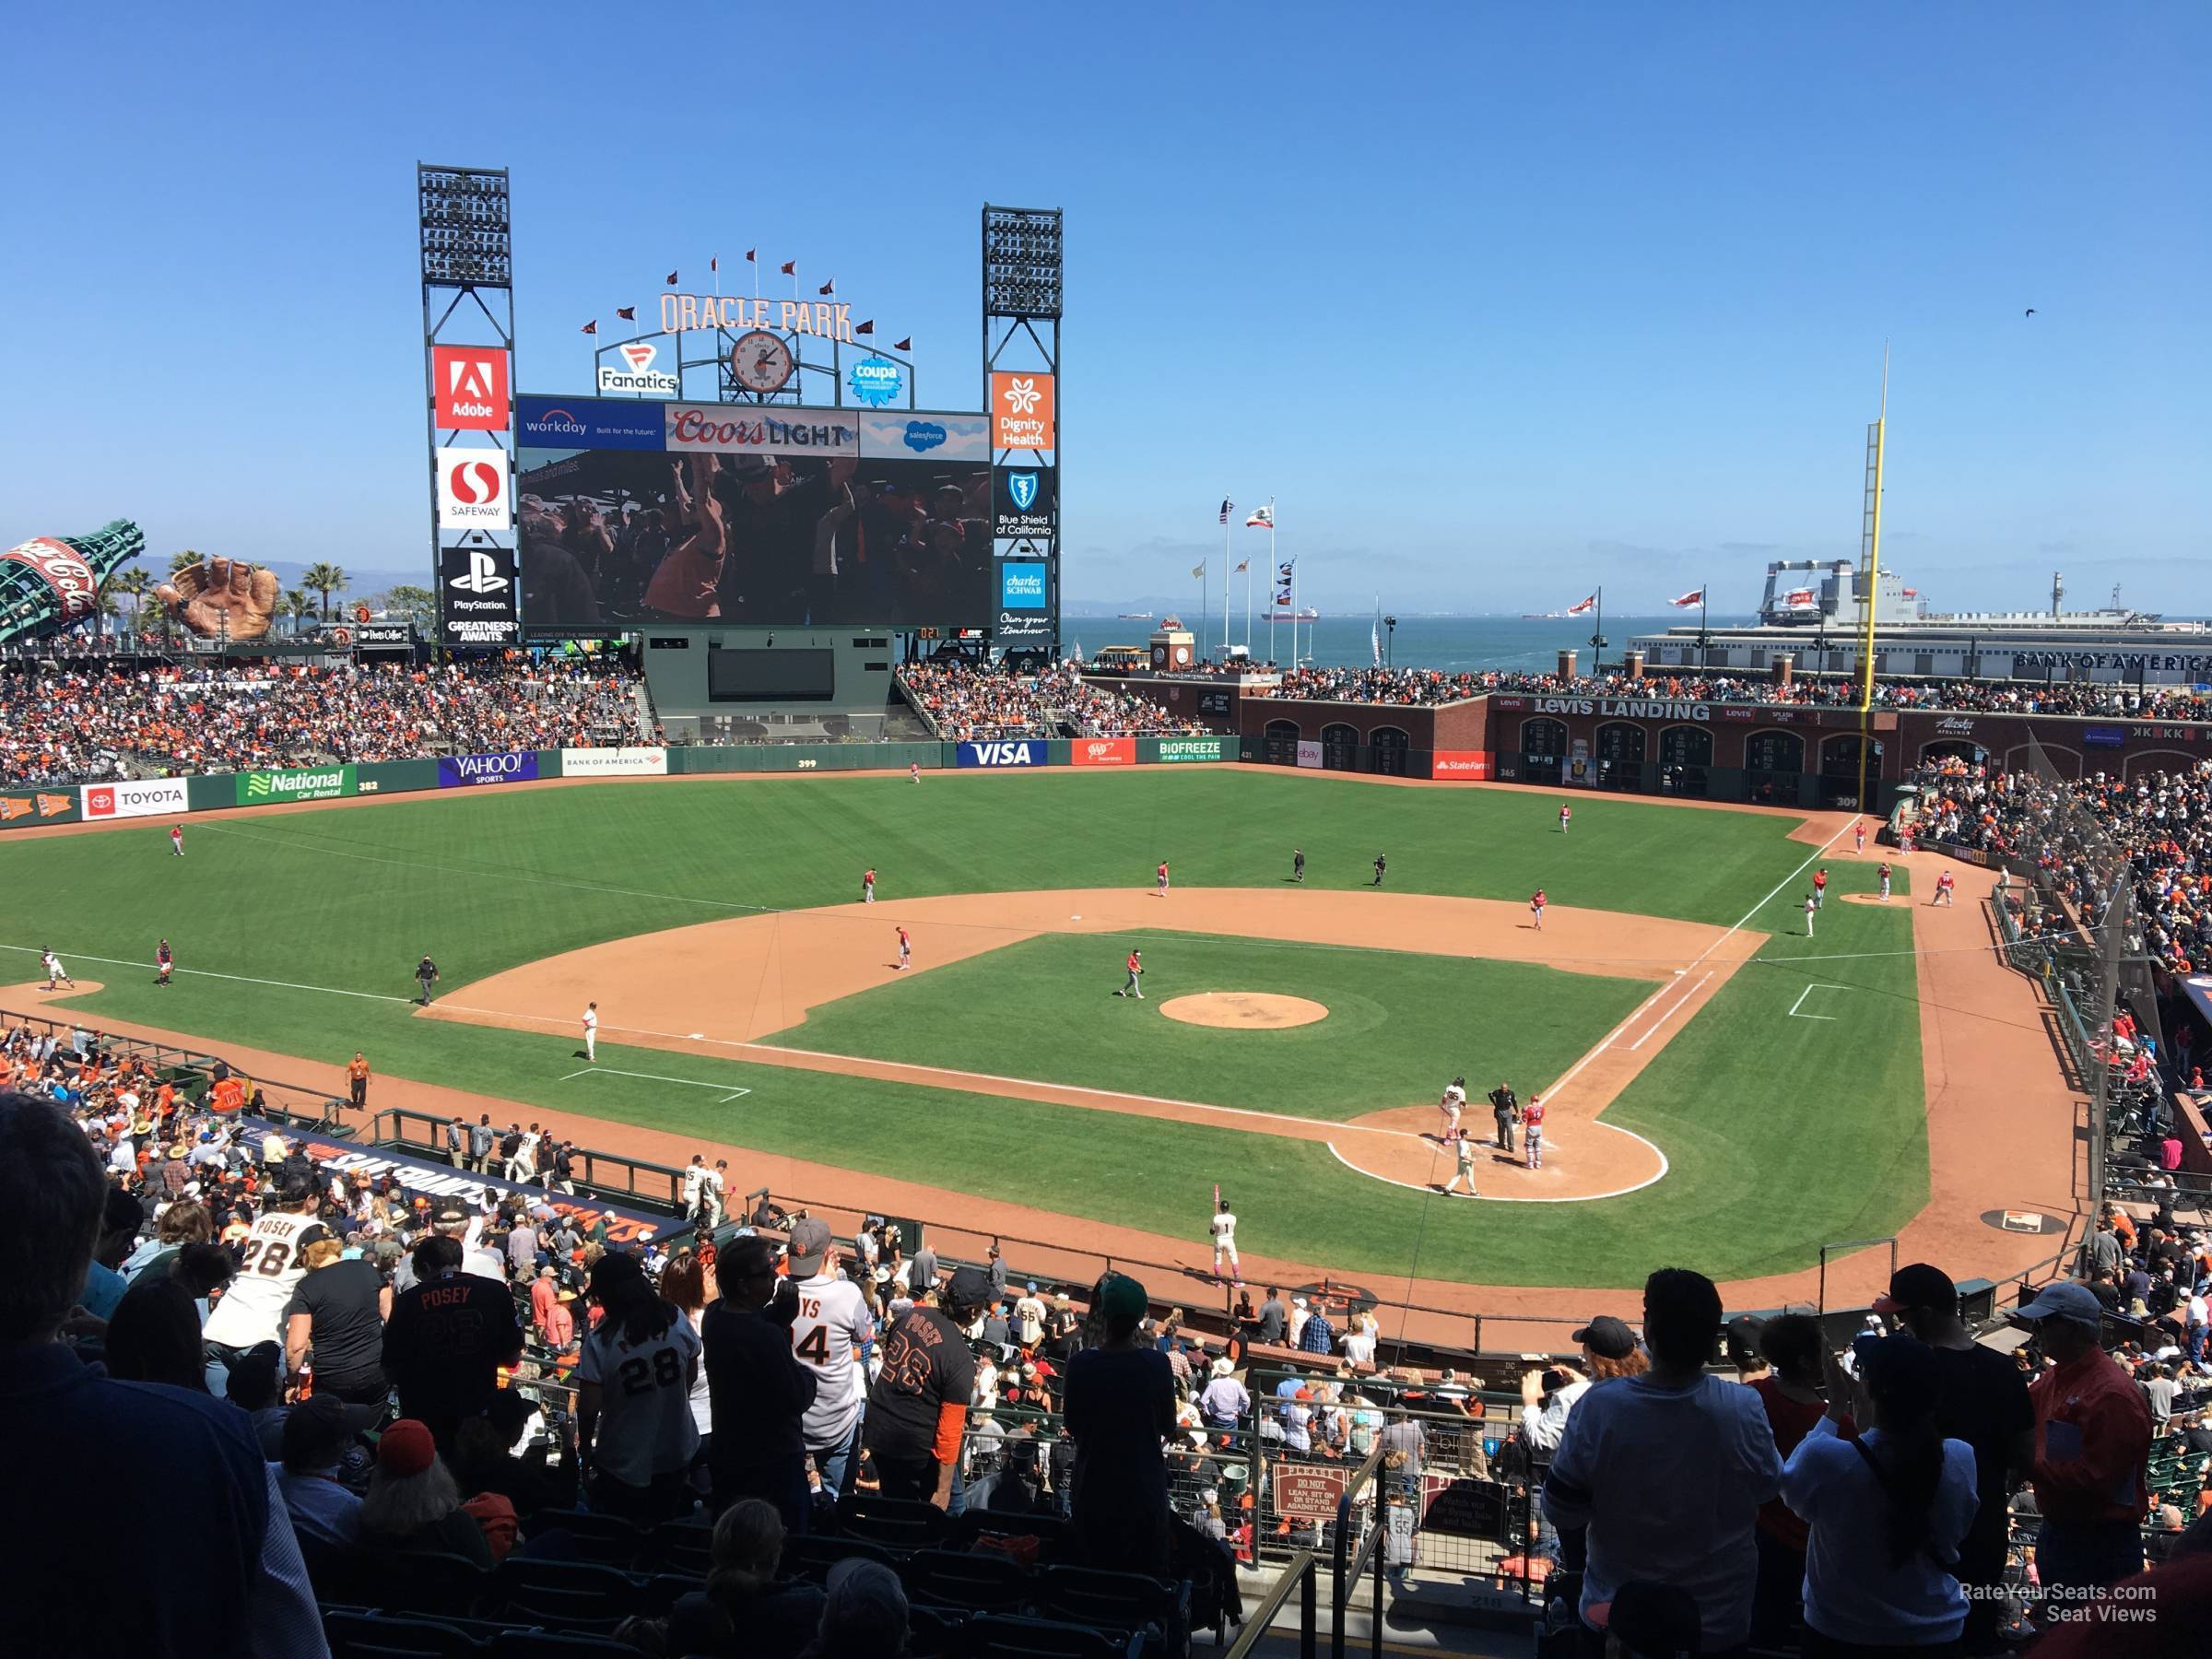 section 218, row i seat view  for baseball - oracle park